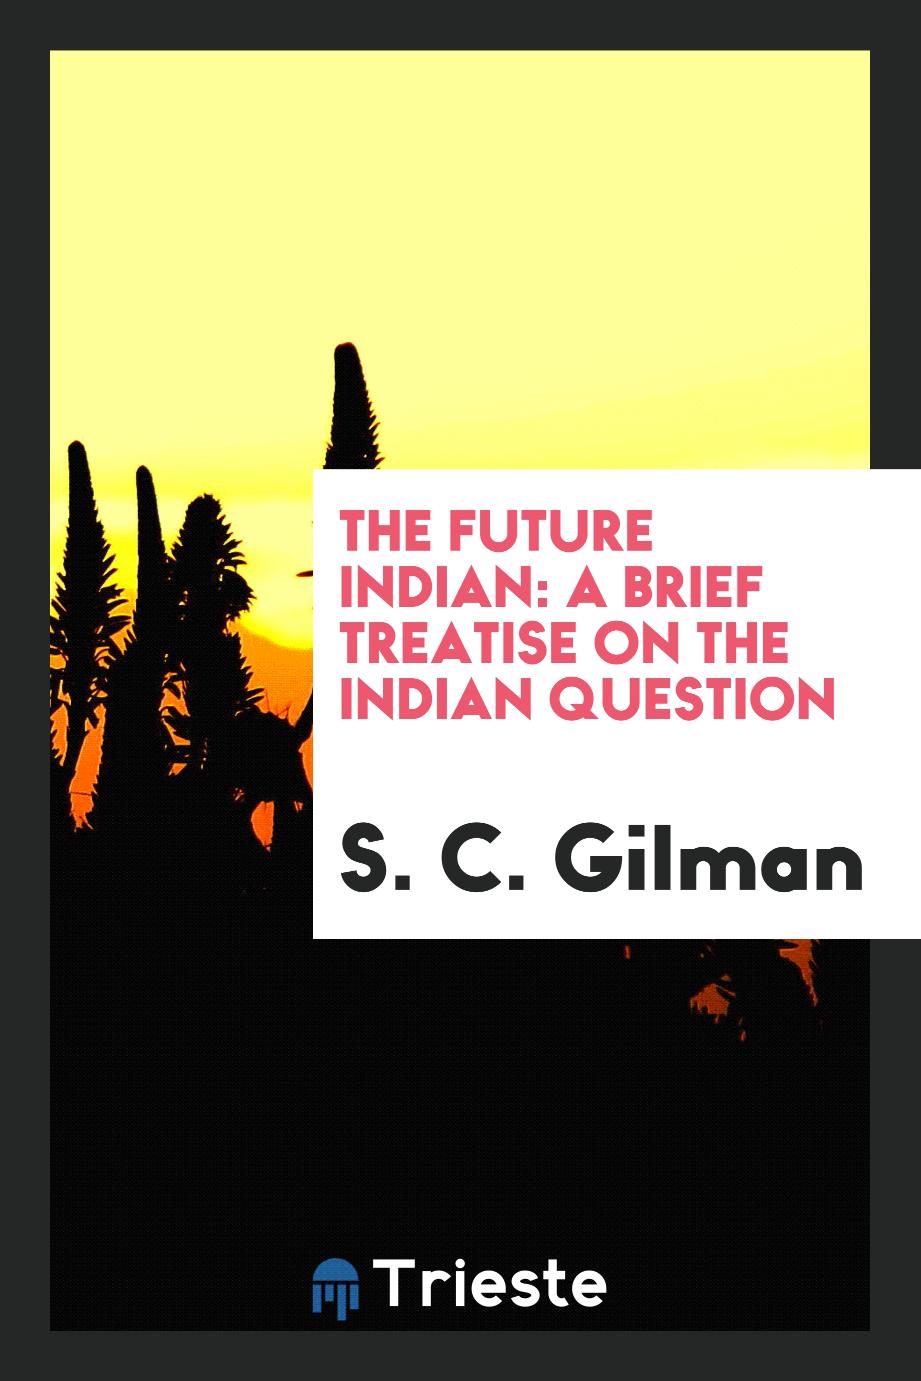 The Future Indian: A Brief Treatise on the Indian Question